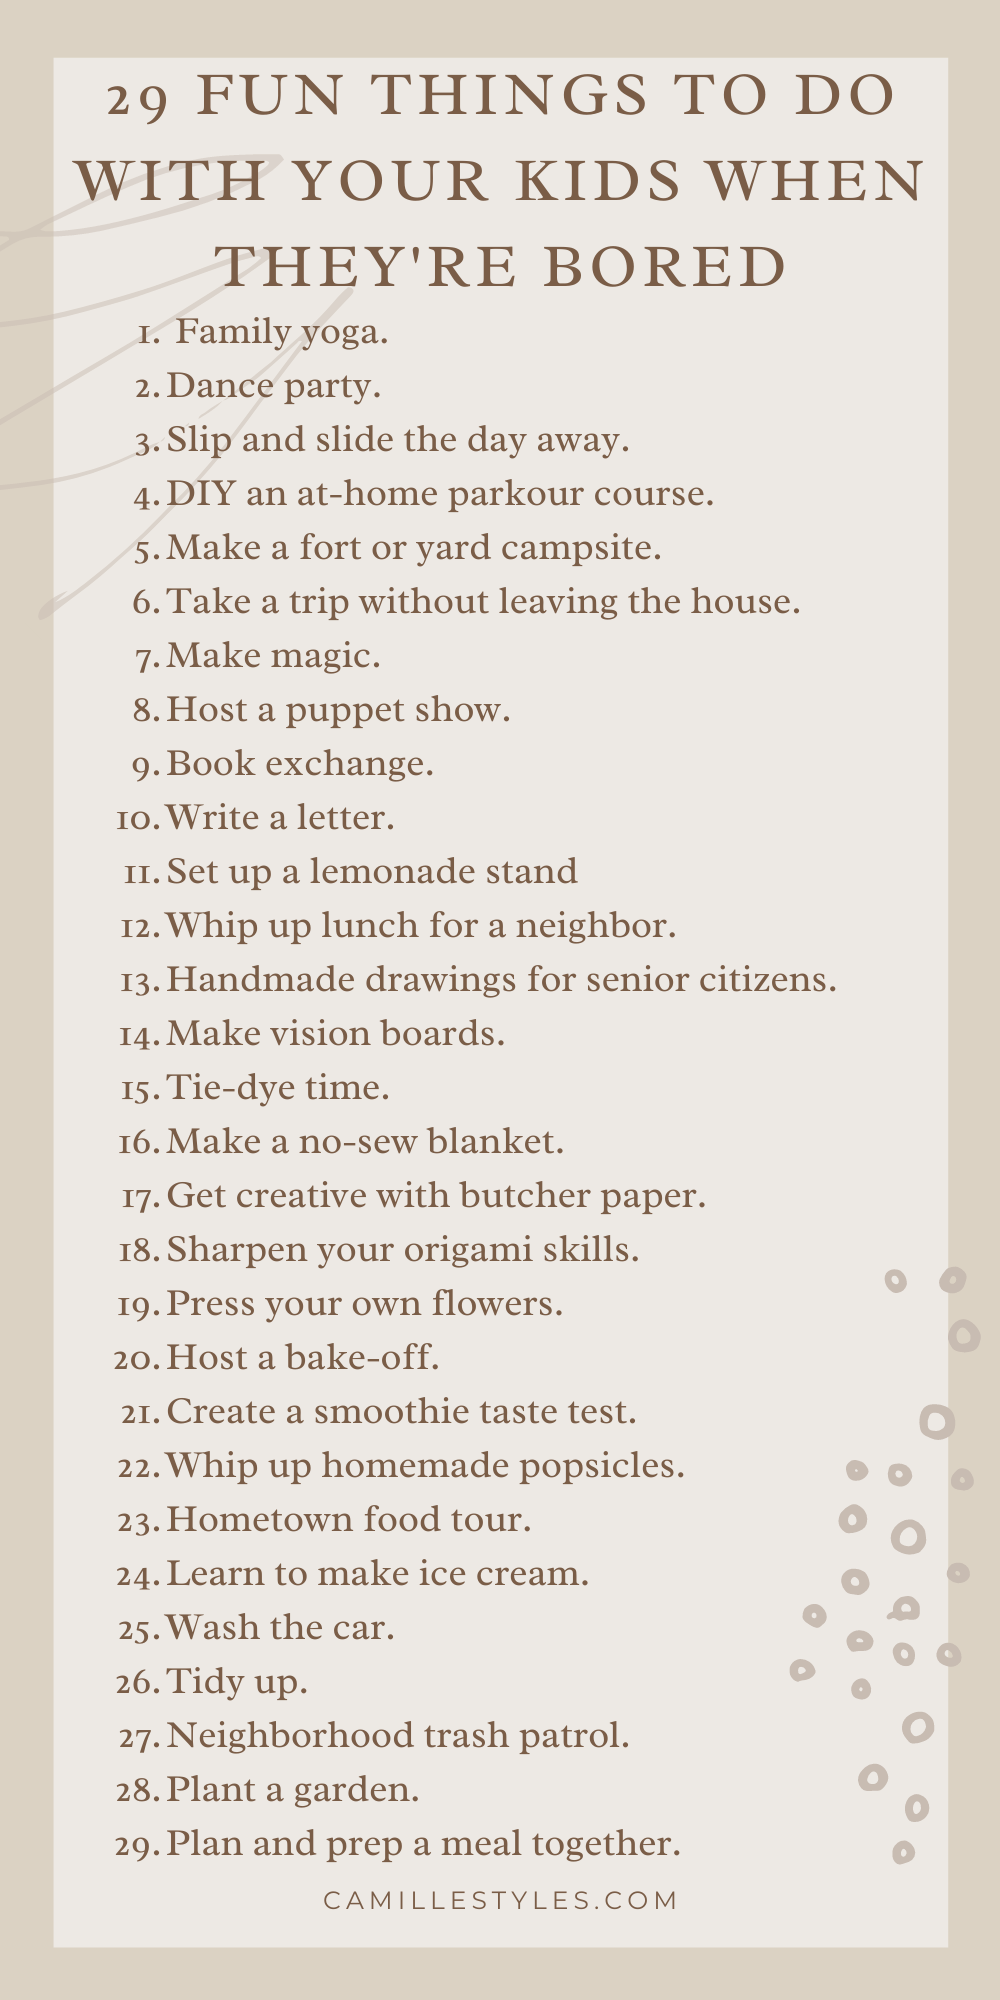 29 Things to Do With Kids When Bored (That Aren't on a Screen)